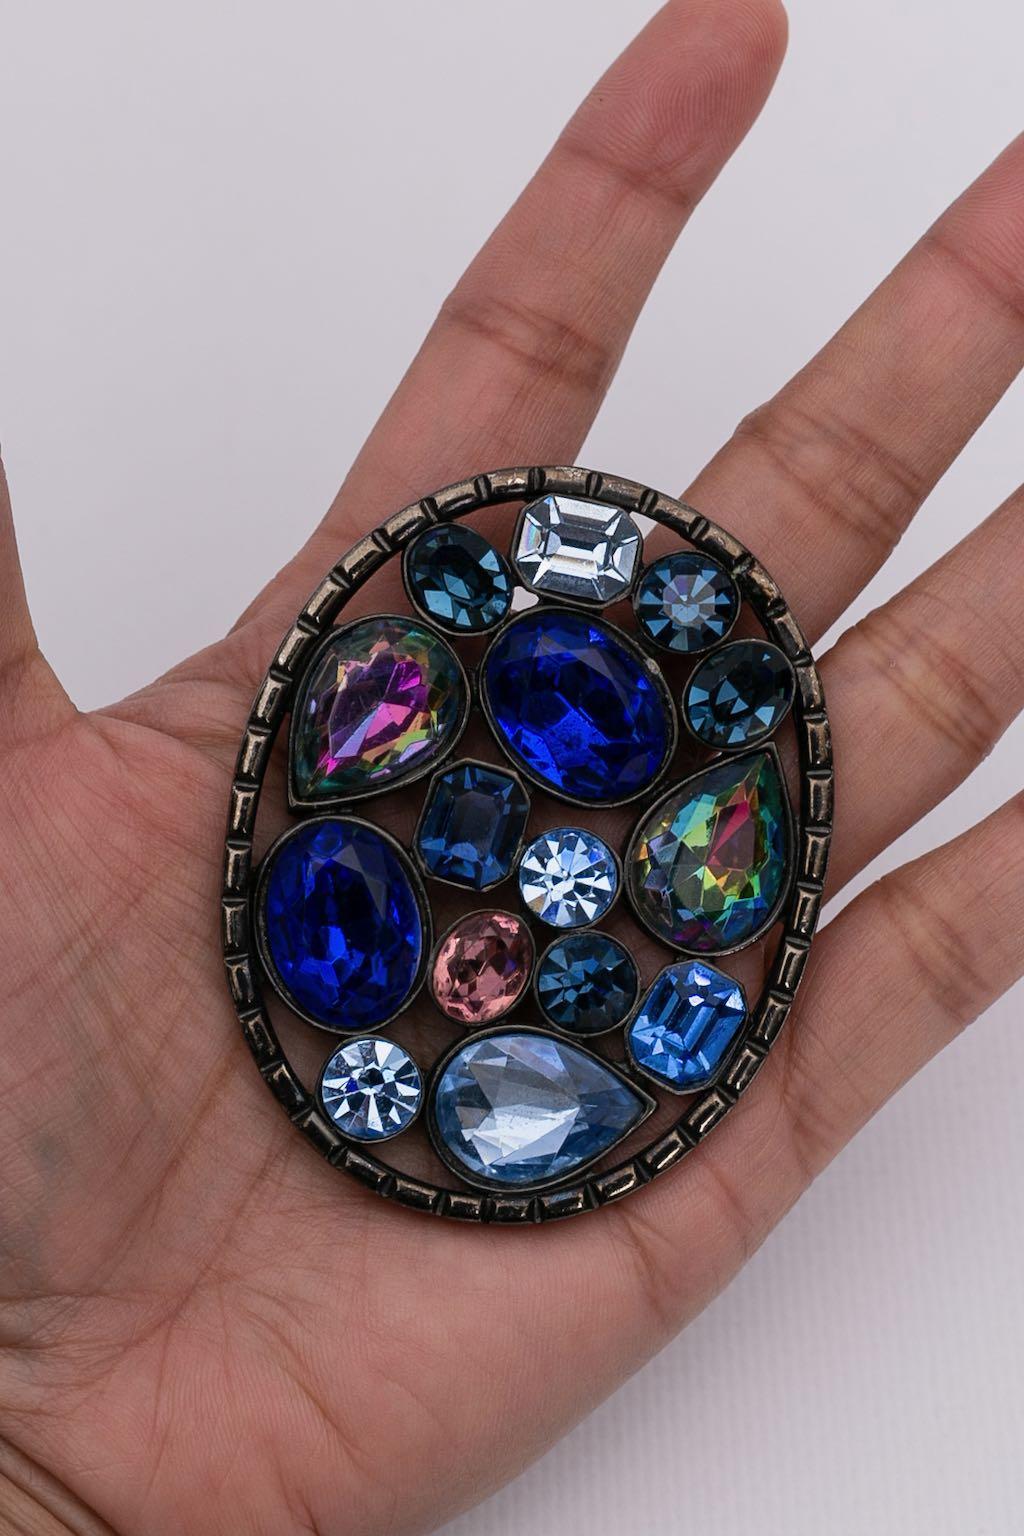 Jean-Louis Scherrer - Blackened metal brooch adorned with rhinestones.

Additional information:
Condition: Very good condition
Dimensions: Length: 6,5 cm (2,56 in) - Width: 5 cm (1,97 in)

Seller Reference: BR23
